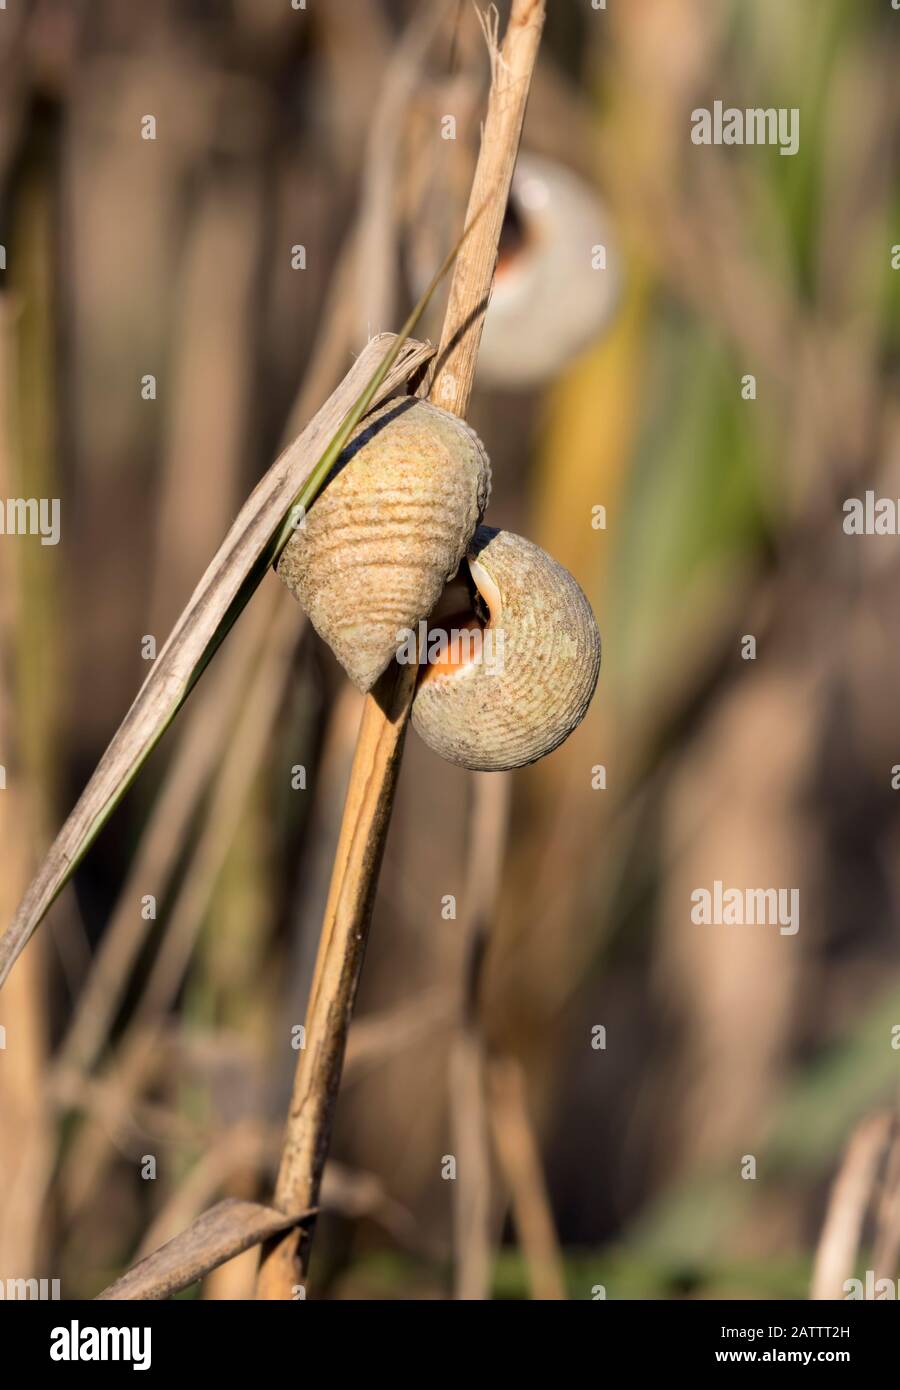 The salt marsh periwinkle snail (Littoraria irrorate) on the air roots of black mangroves (Avicennia germinans) Stock Photo